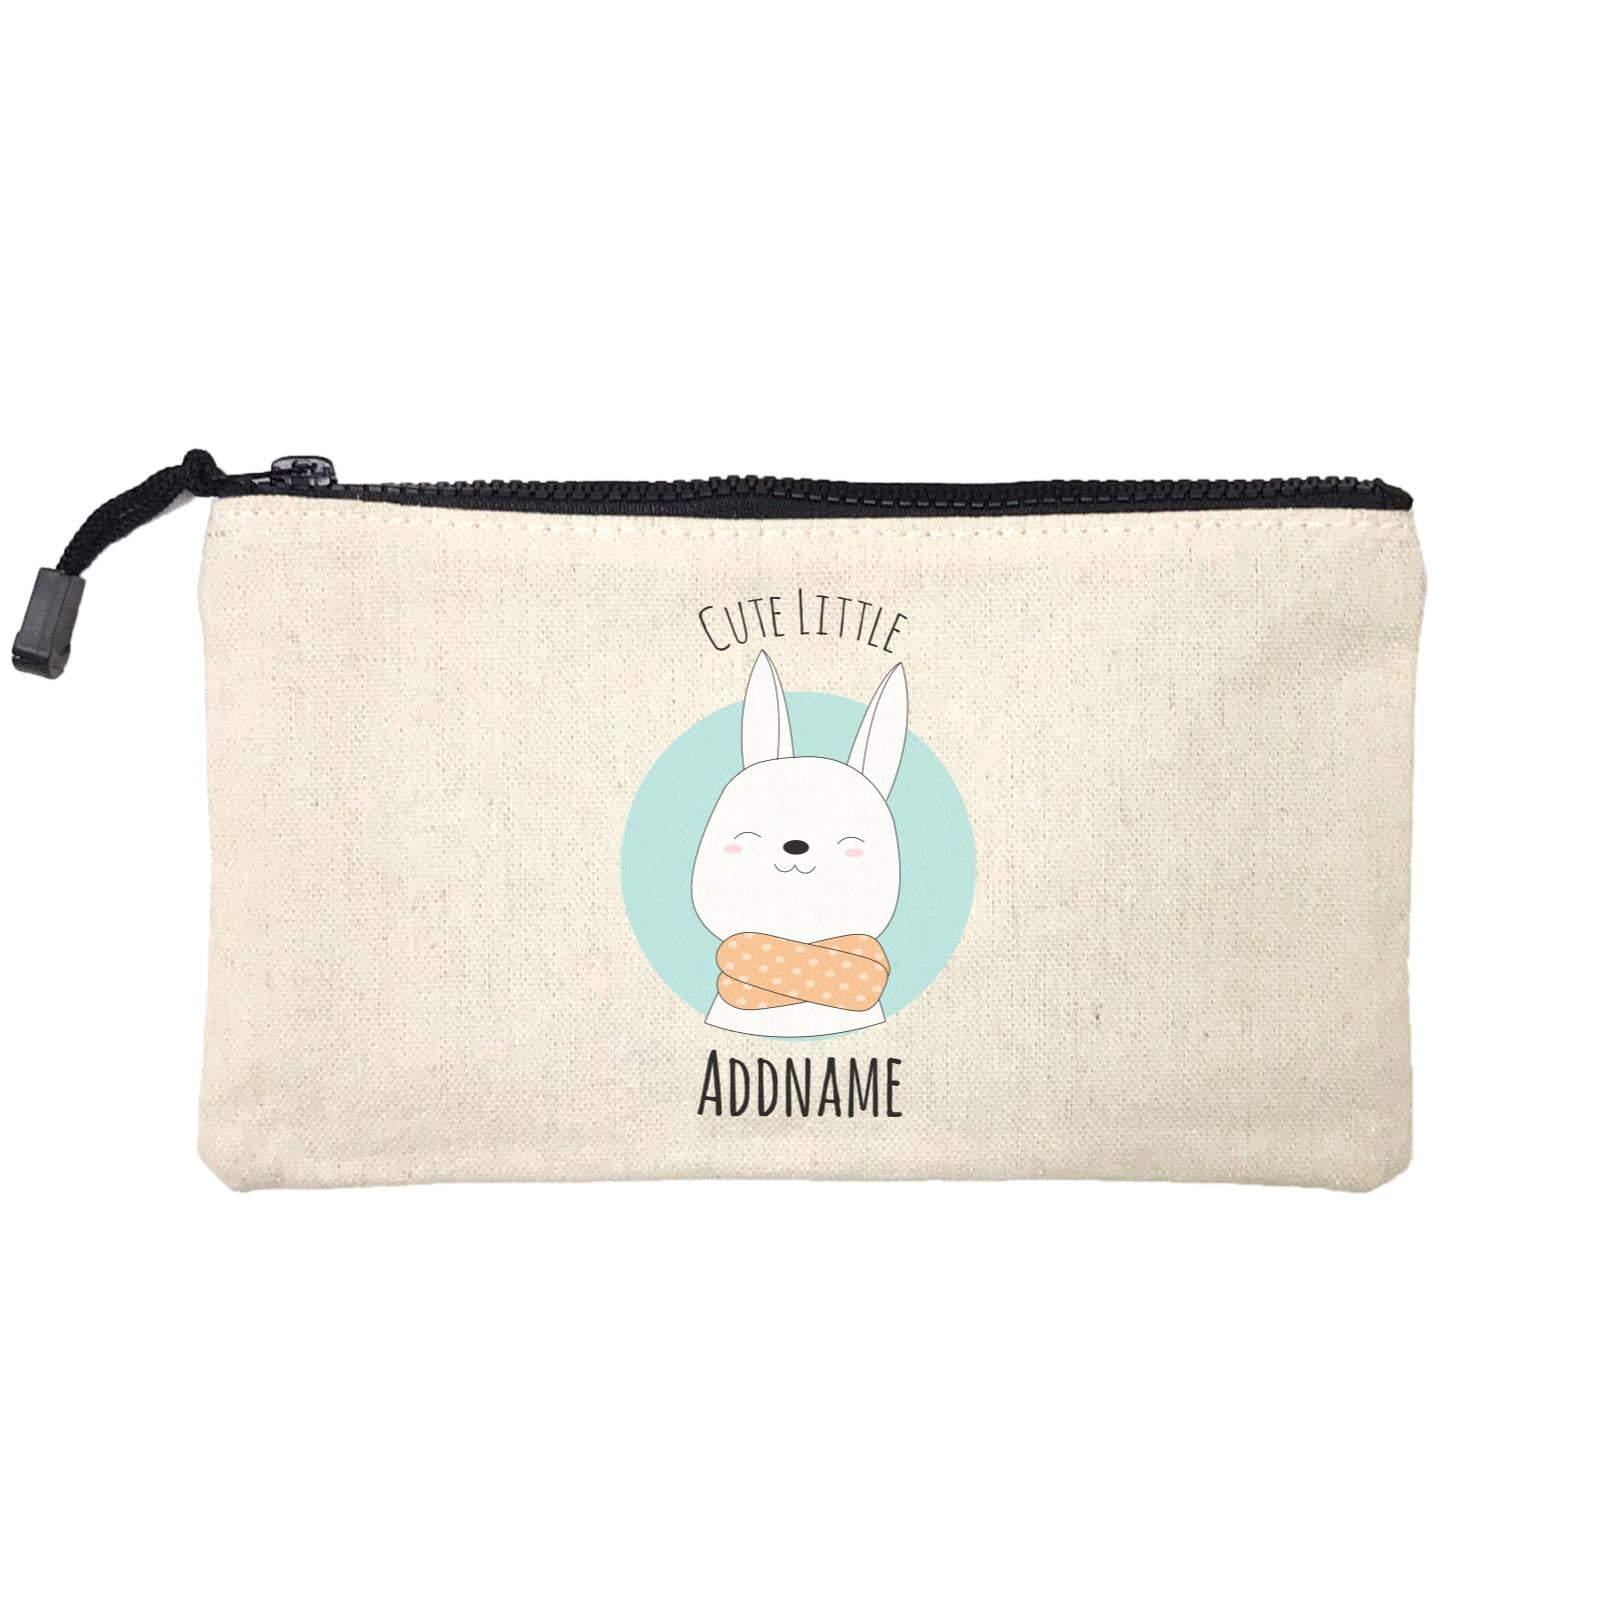 Sweet Animals Sketches Rabbit Cute Little Addname Mini Accessories Stationery Pouch